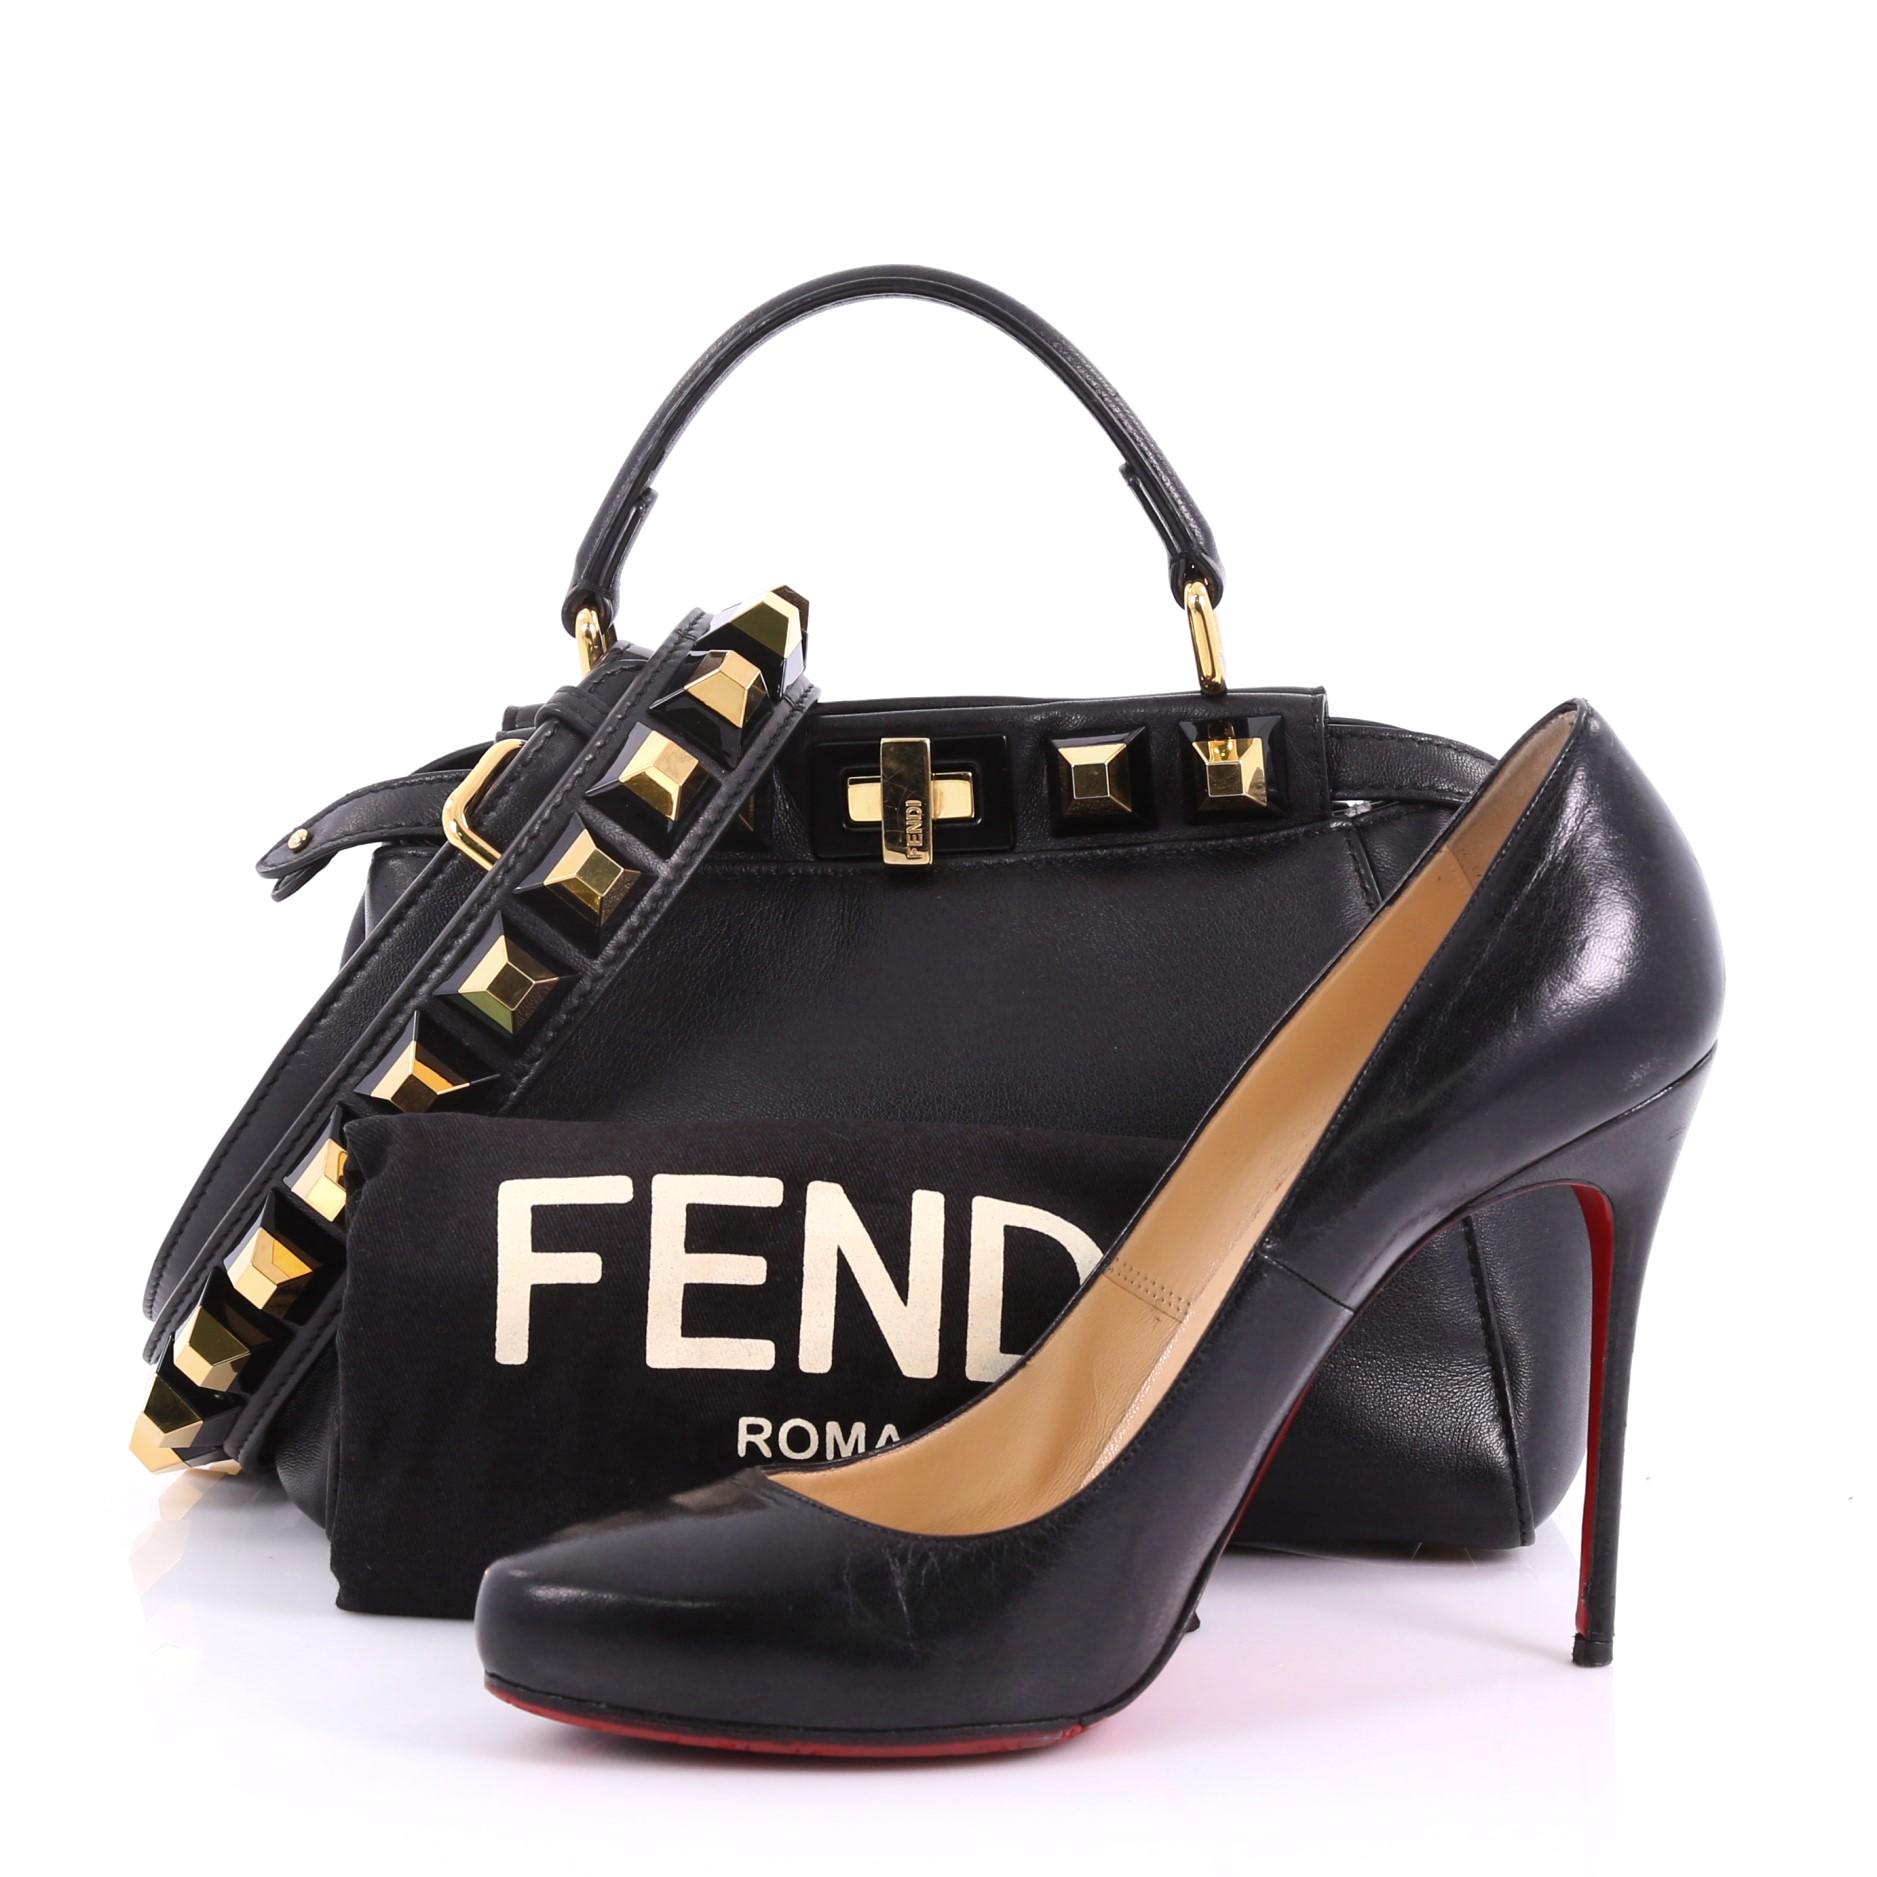 This Fendi Peekaboo Handbag Leather with Studded Detail Mini, crafted in black leather with studded detail, features flat leather top handle, stud detailing, and gold-tone hardware. Its turn-lock closures on both sides opens to a black leather